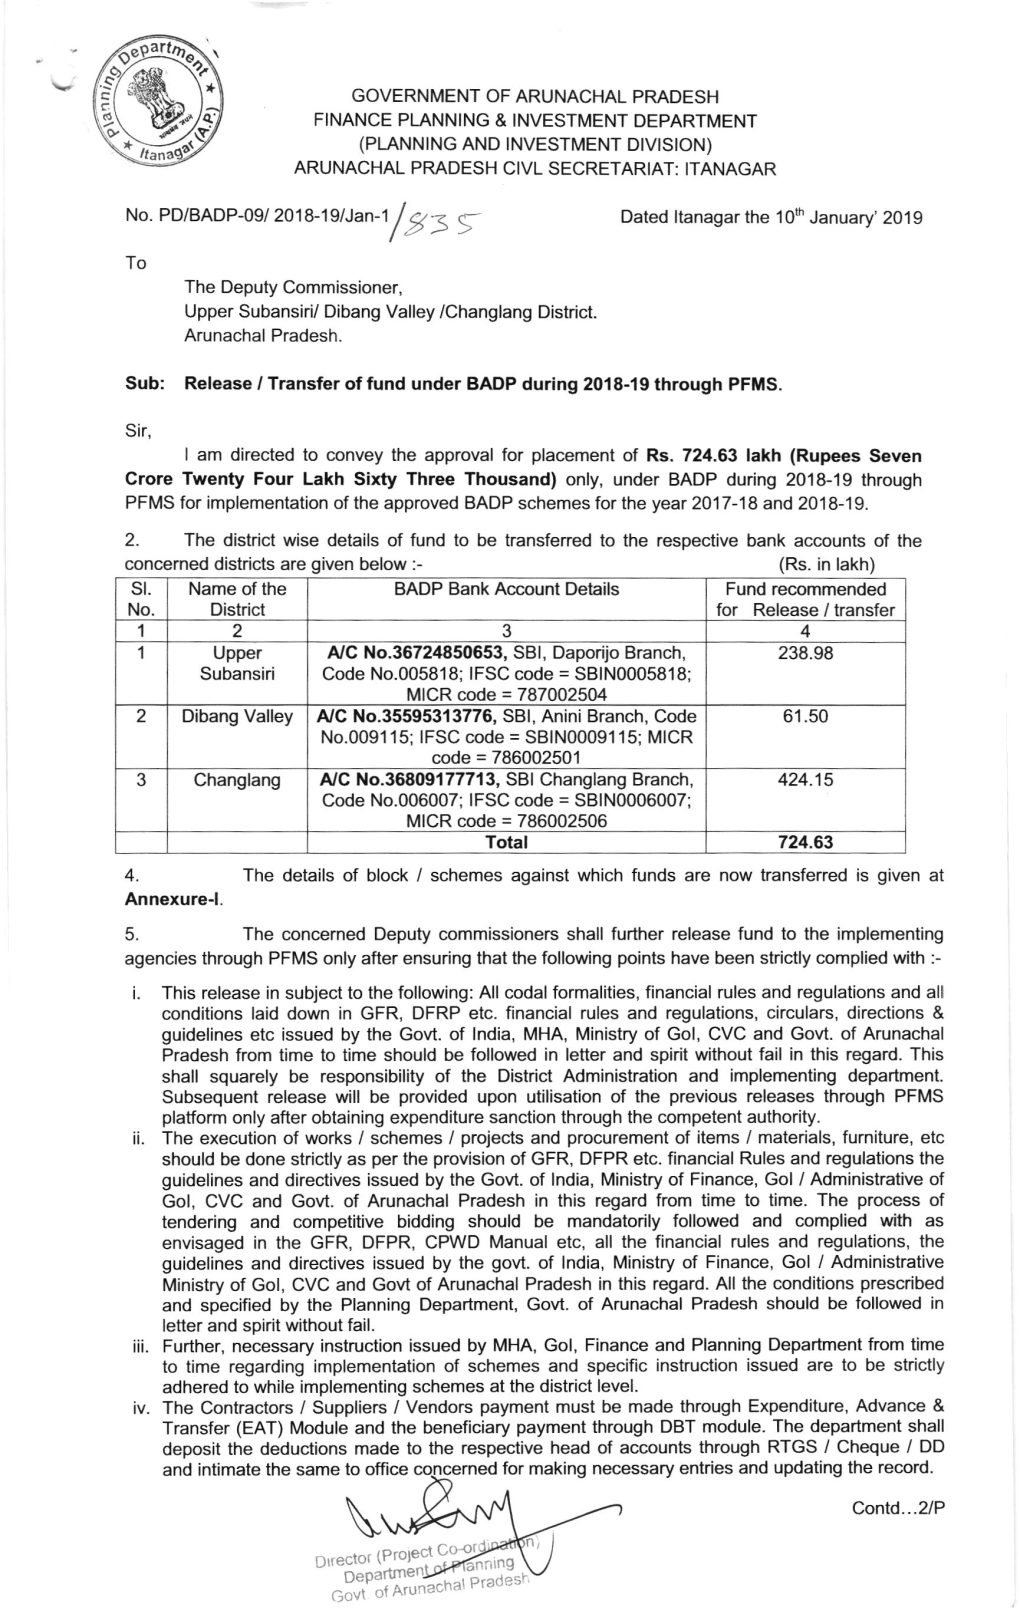 Release / Transfer of Fund Under BADP During 2018-19 Through PFMS for the Month of 10Th